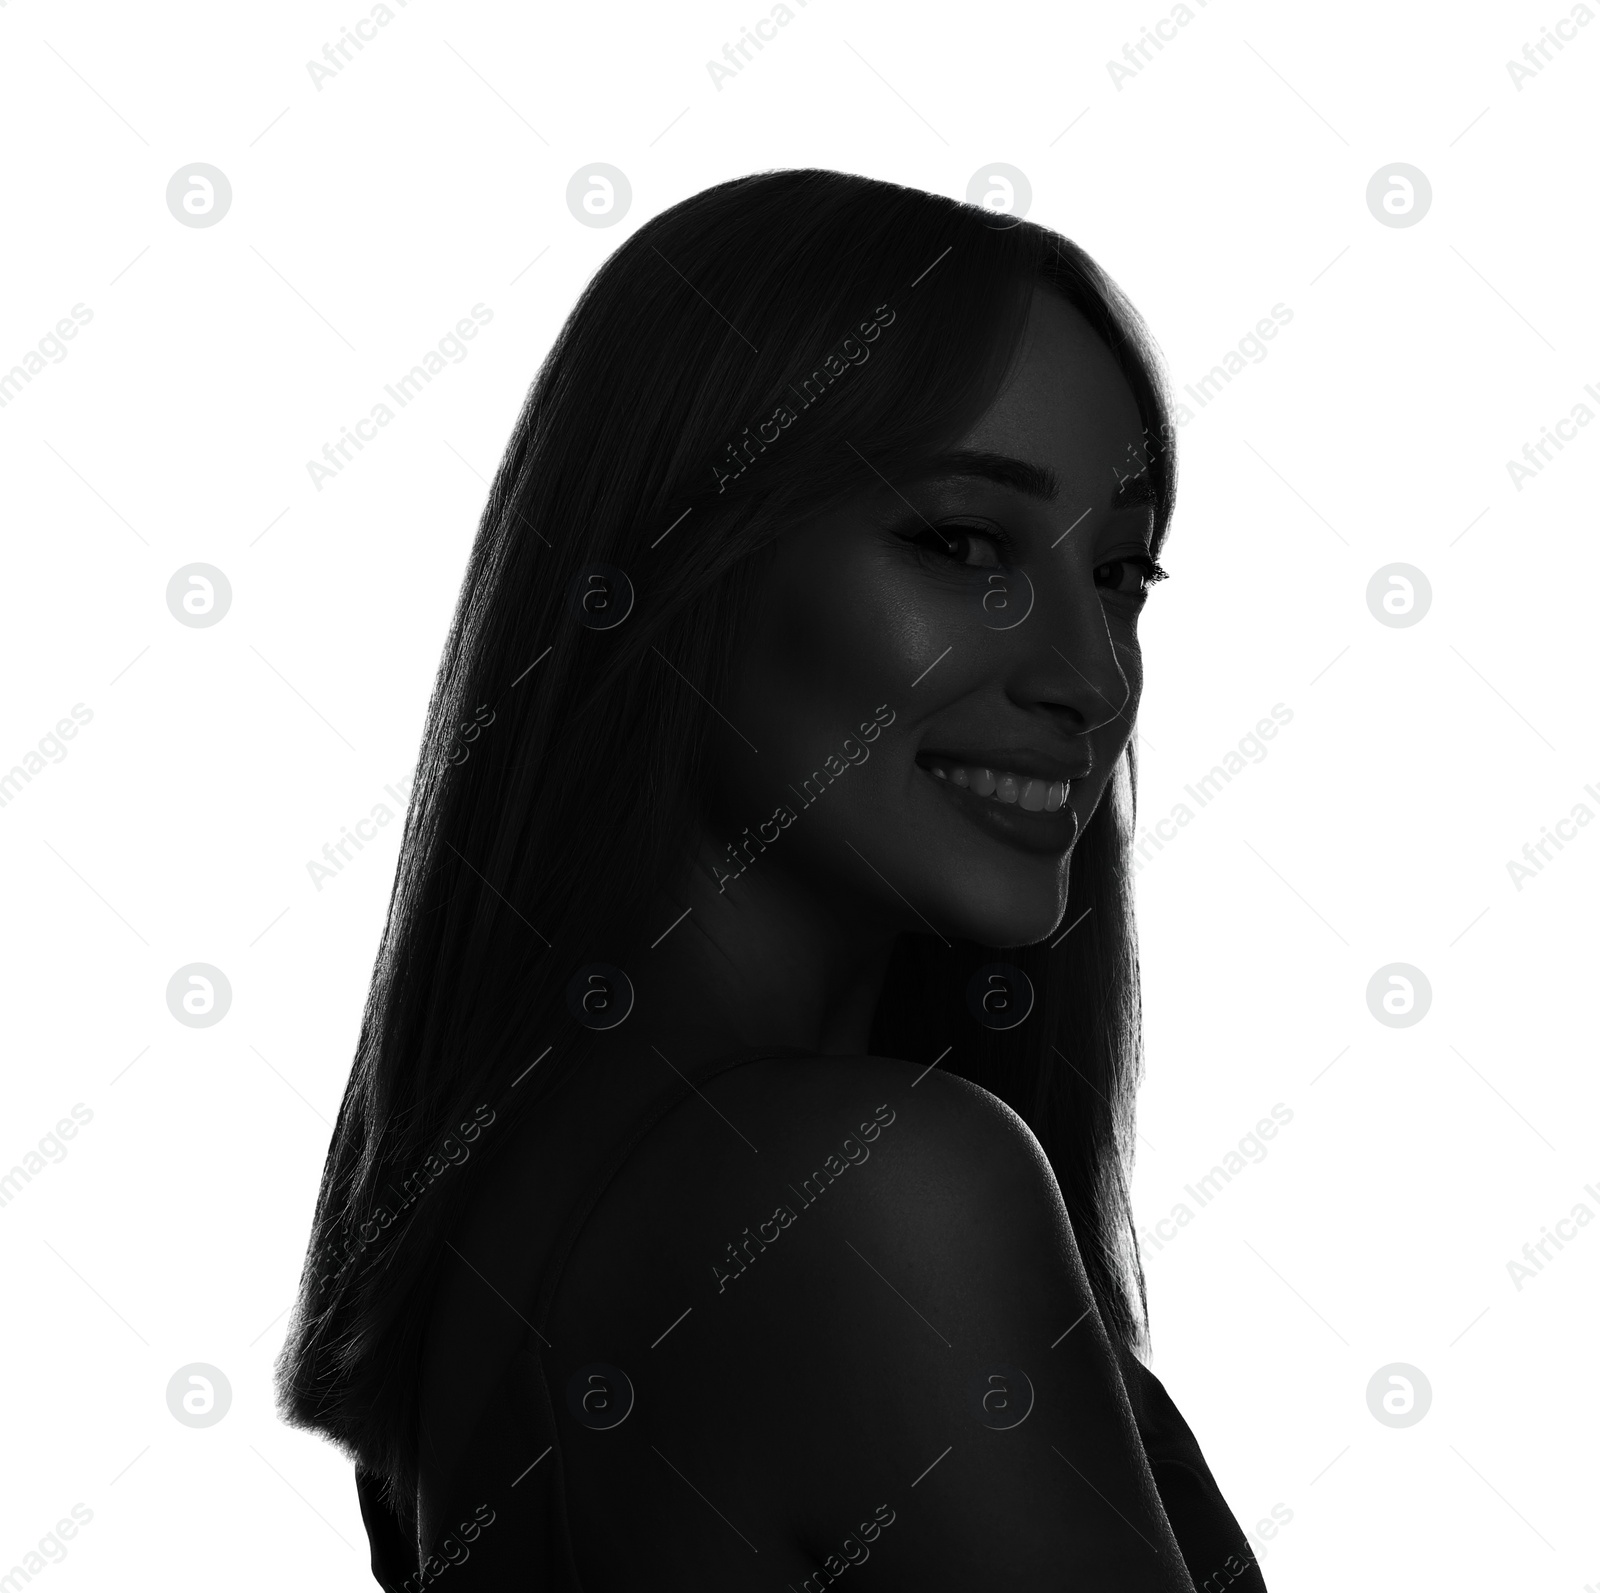 Image of Silhouette of happy woman isolated on white